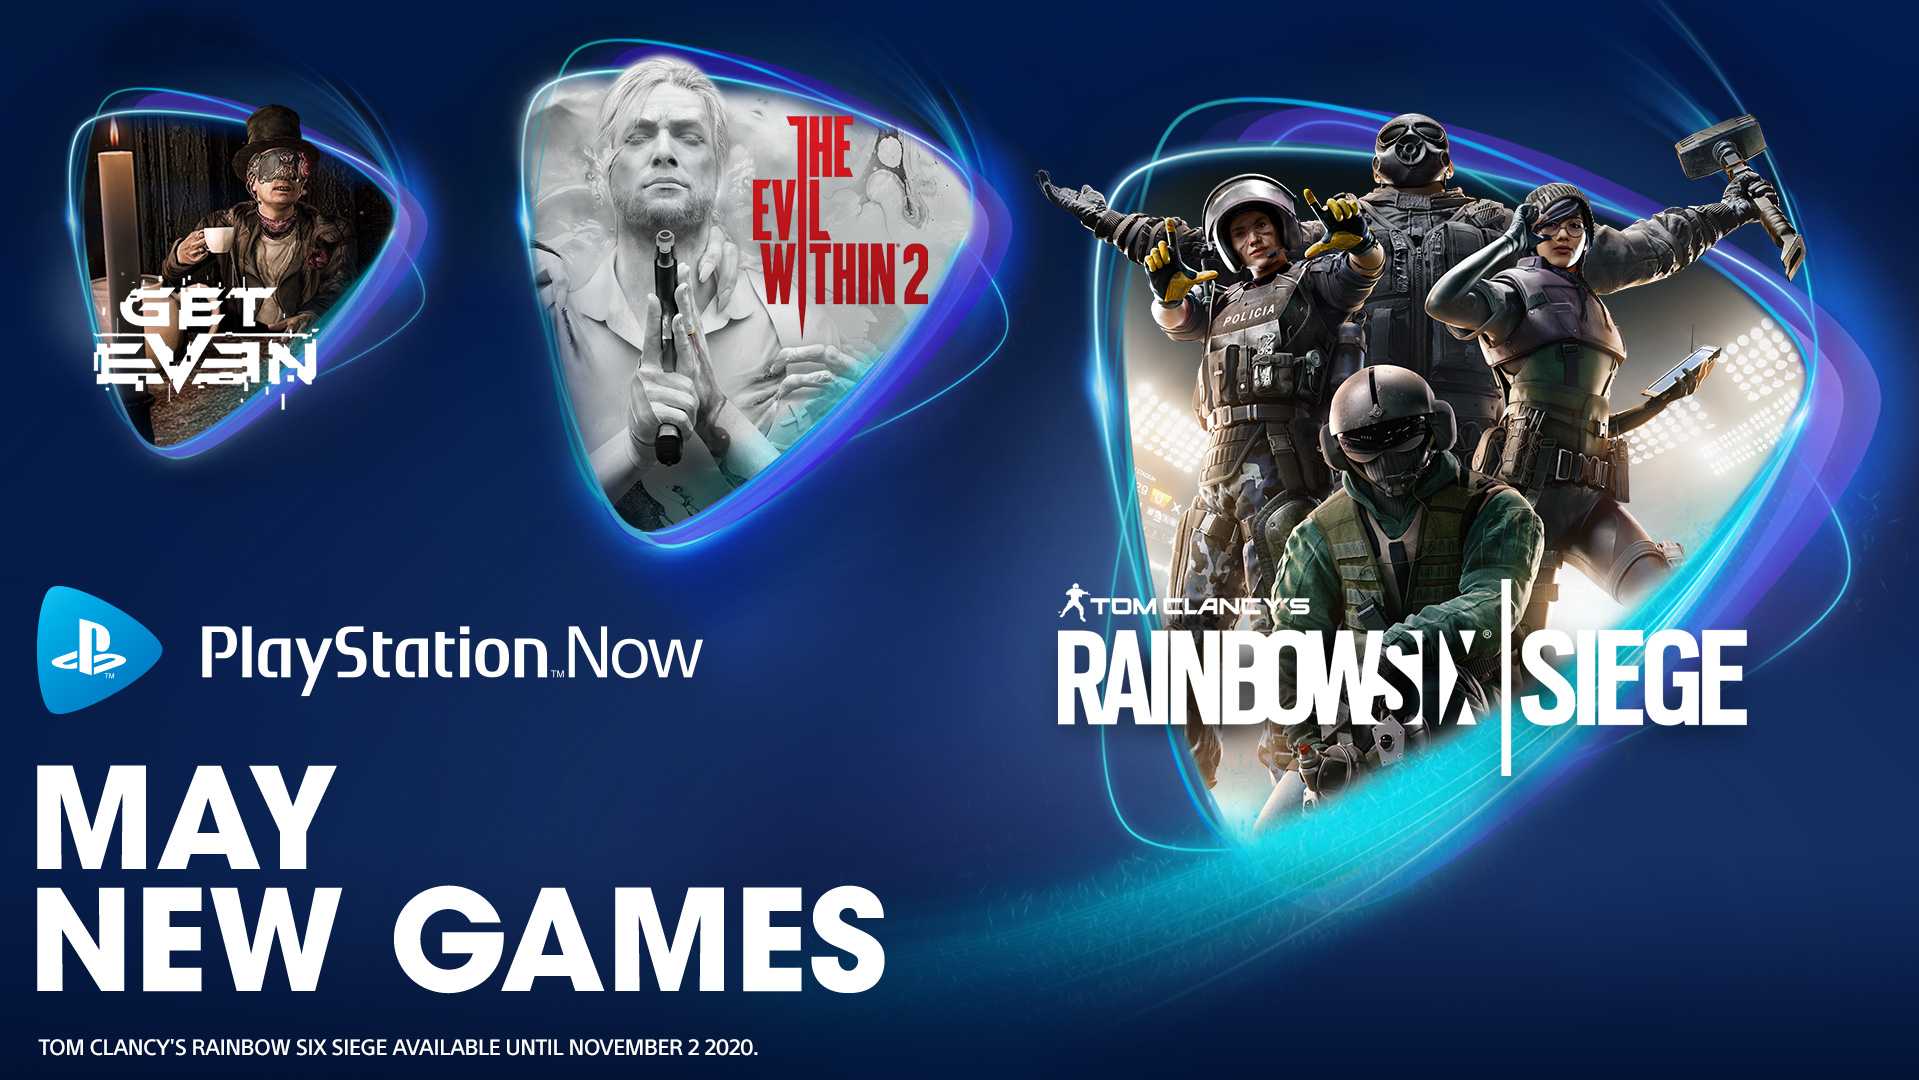 PS Now Adds 9 New Titles to Streaming Service, Metal Gear Sold V: Phantom  Pain Headlines - Gameranx